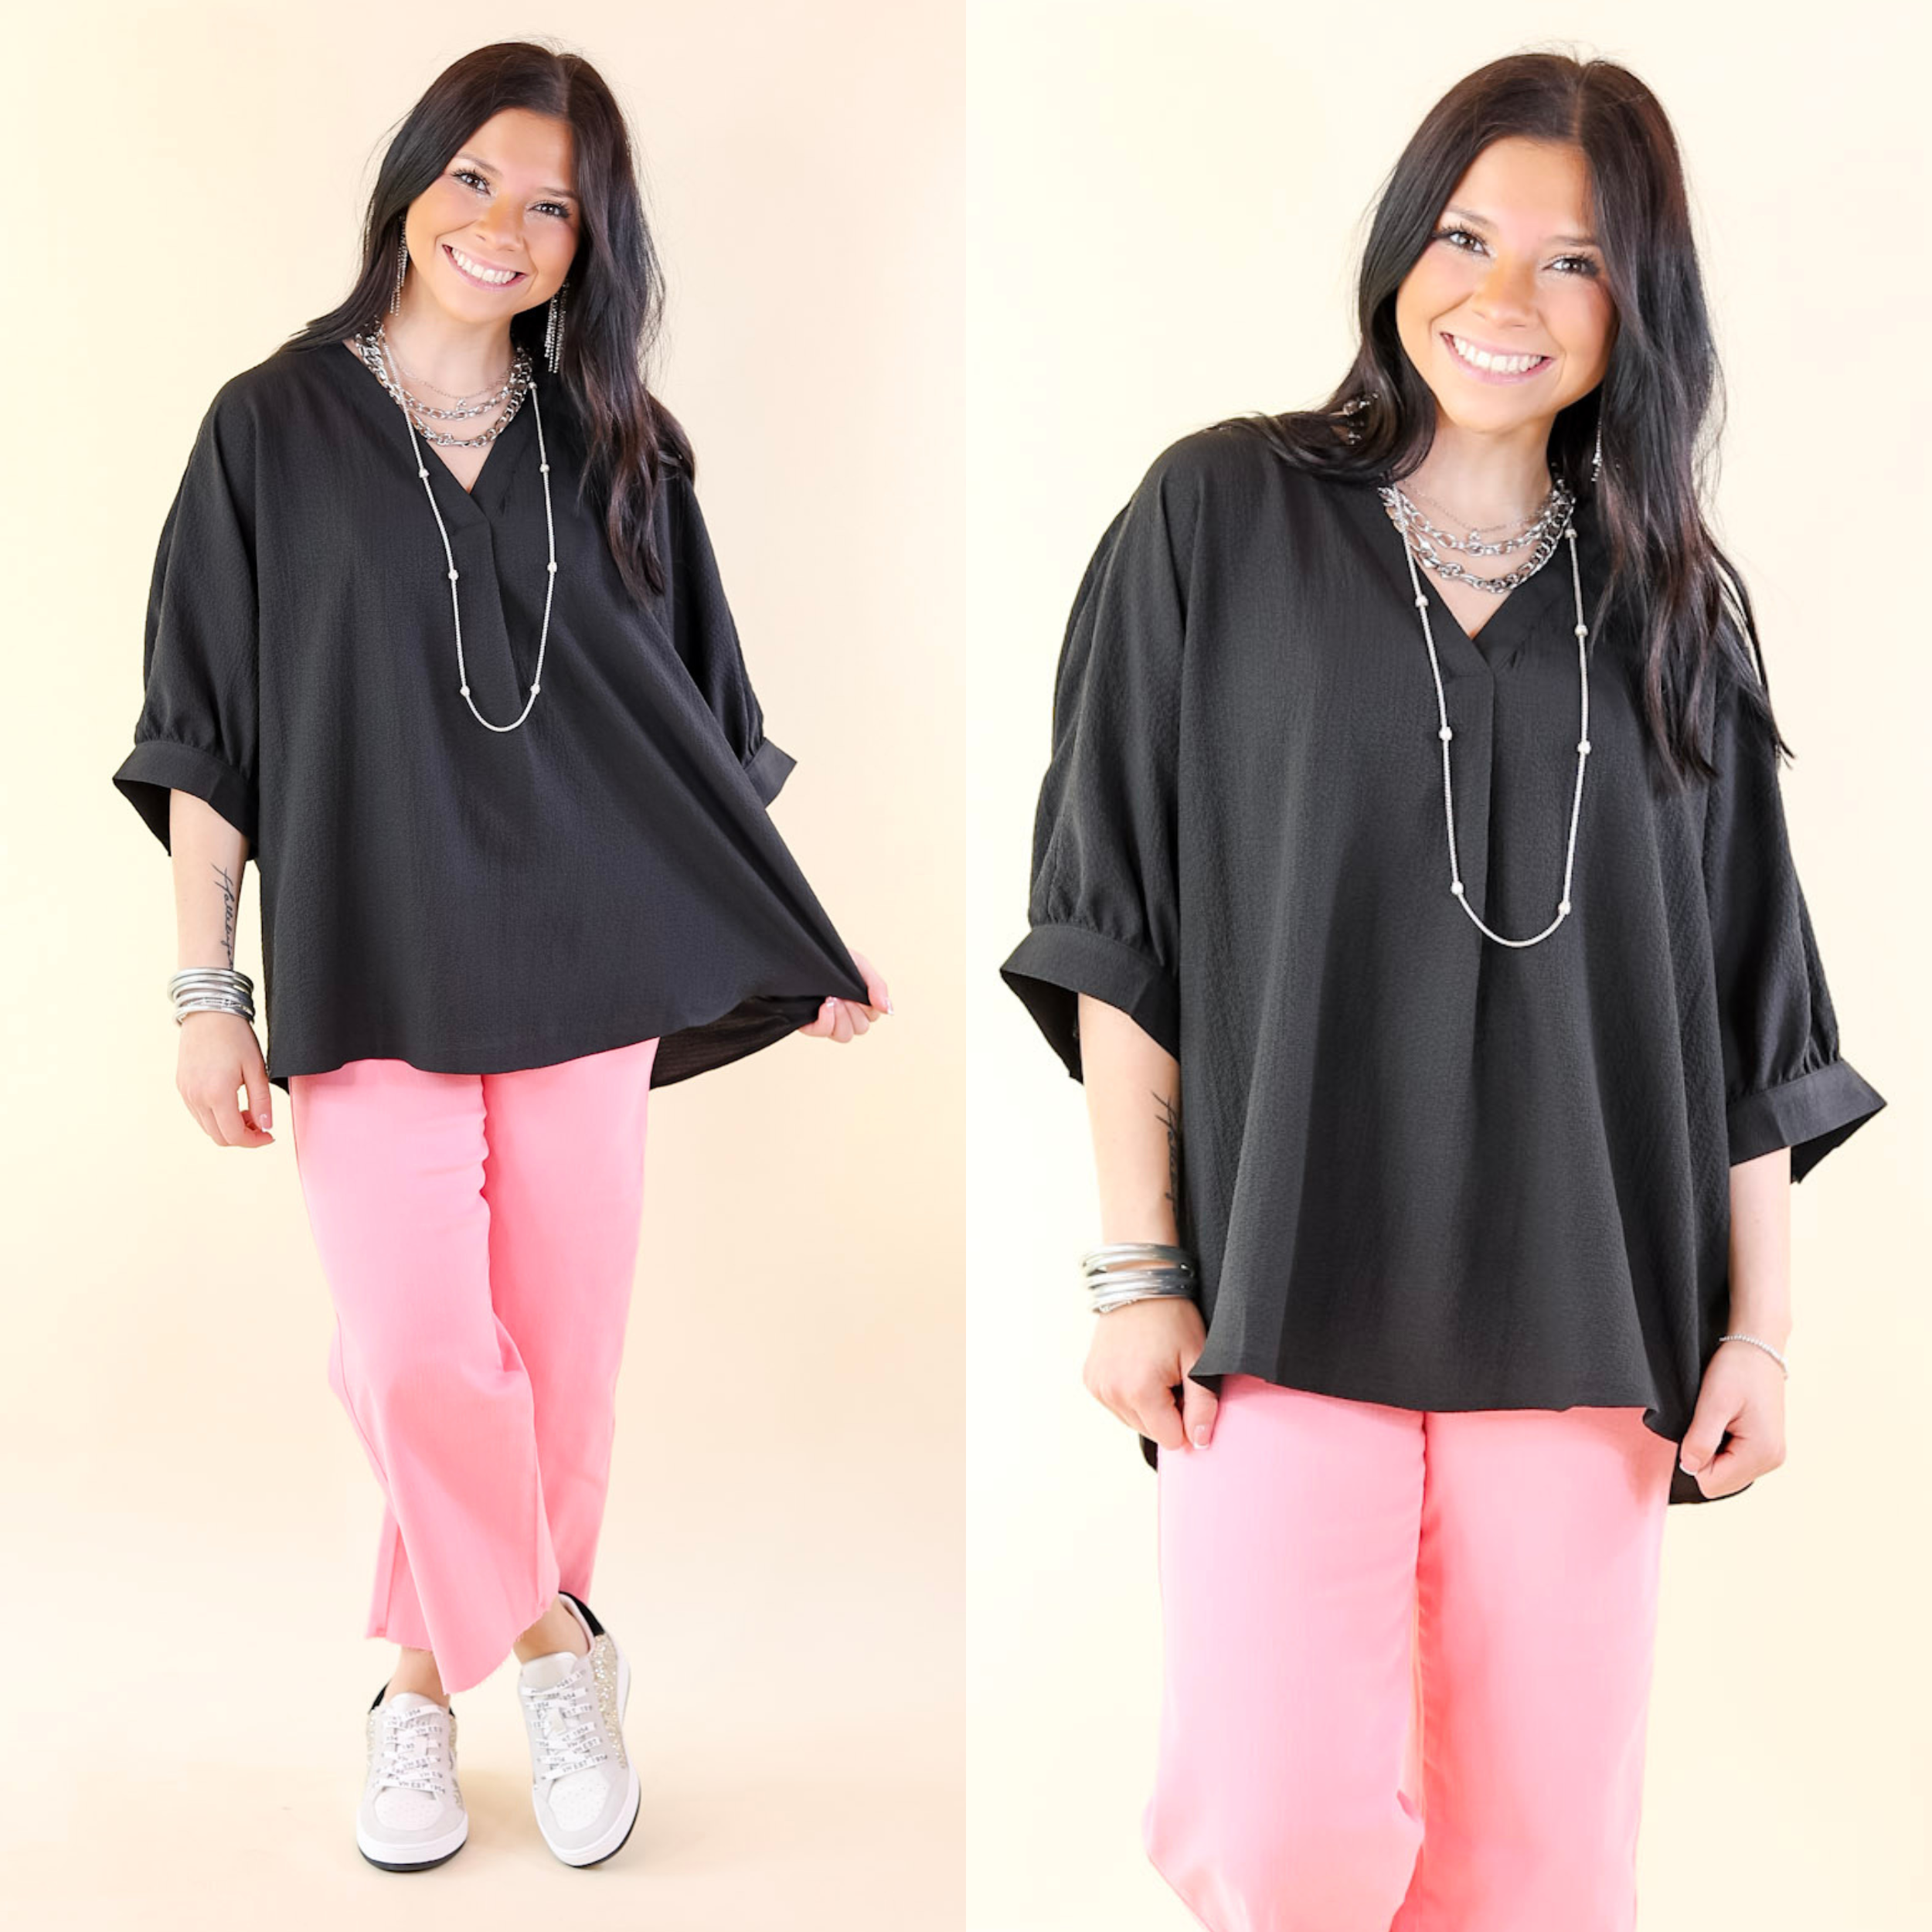 Chic and Charming V Neck Top with 3/4 Sleeves in Black